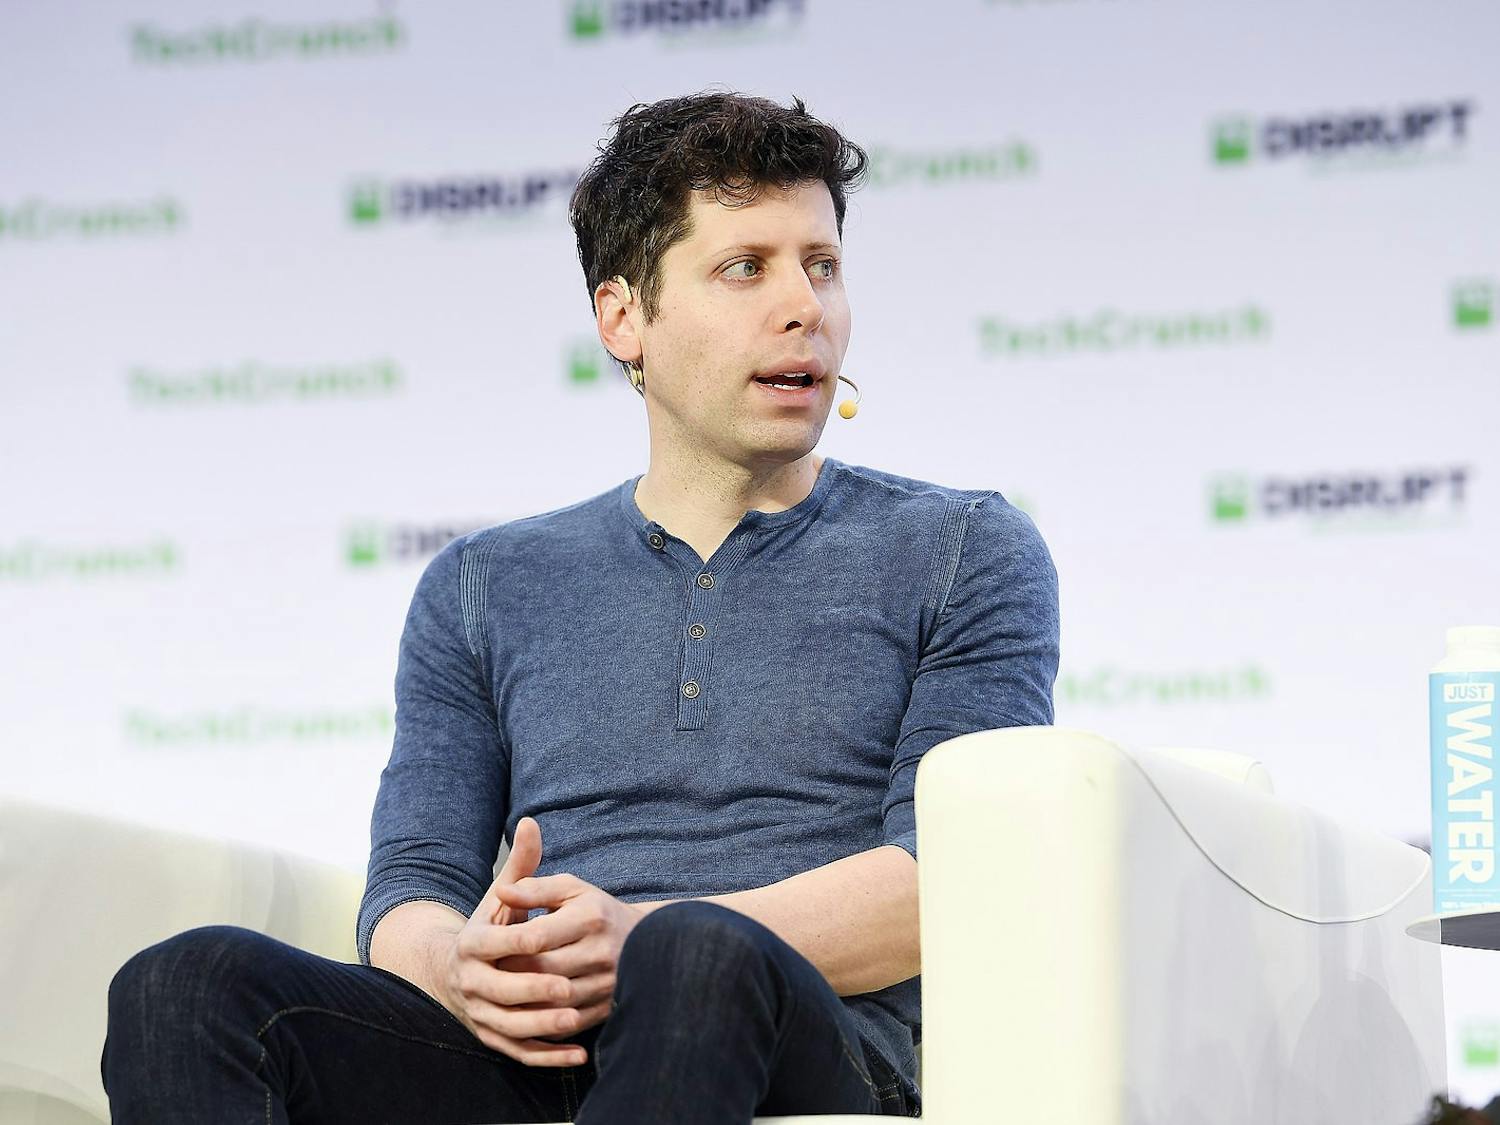 OpenAI, the company behind ChatGPT, announced the return of their CEO Sam Altman under a different board of directors on Nov. 21, just five days after he had been fired (Photo courtesy of Wikimedia Commons/“Disrupt SF TechCrunch Disrupt San Francisco 2019 - Day 2” by TechCrunch. CC-BY-2.0. October 3, 2019). 